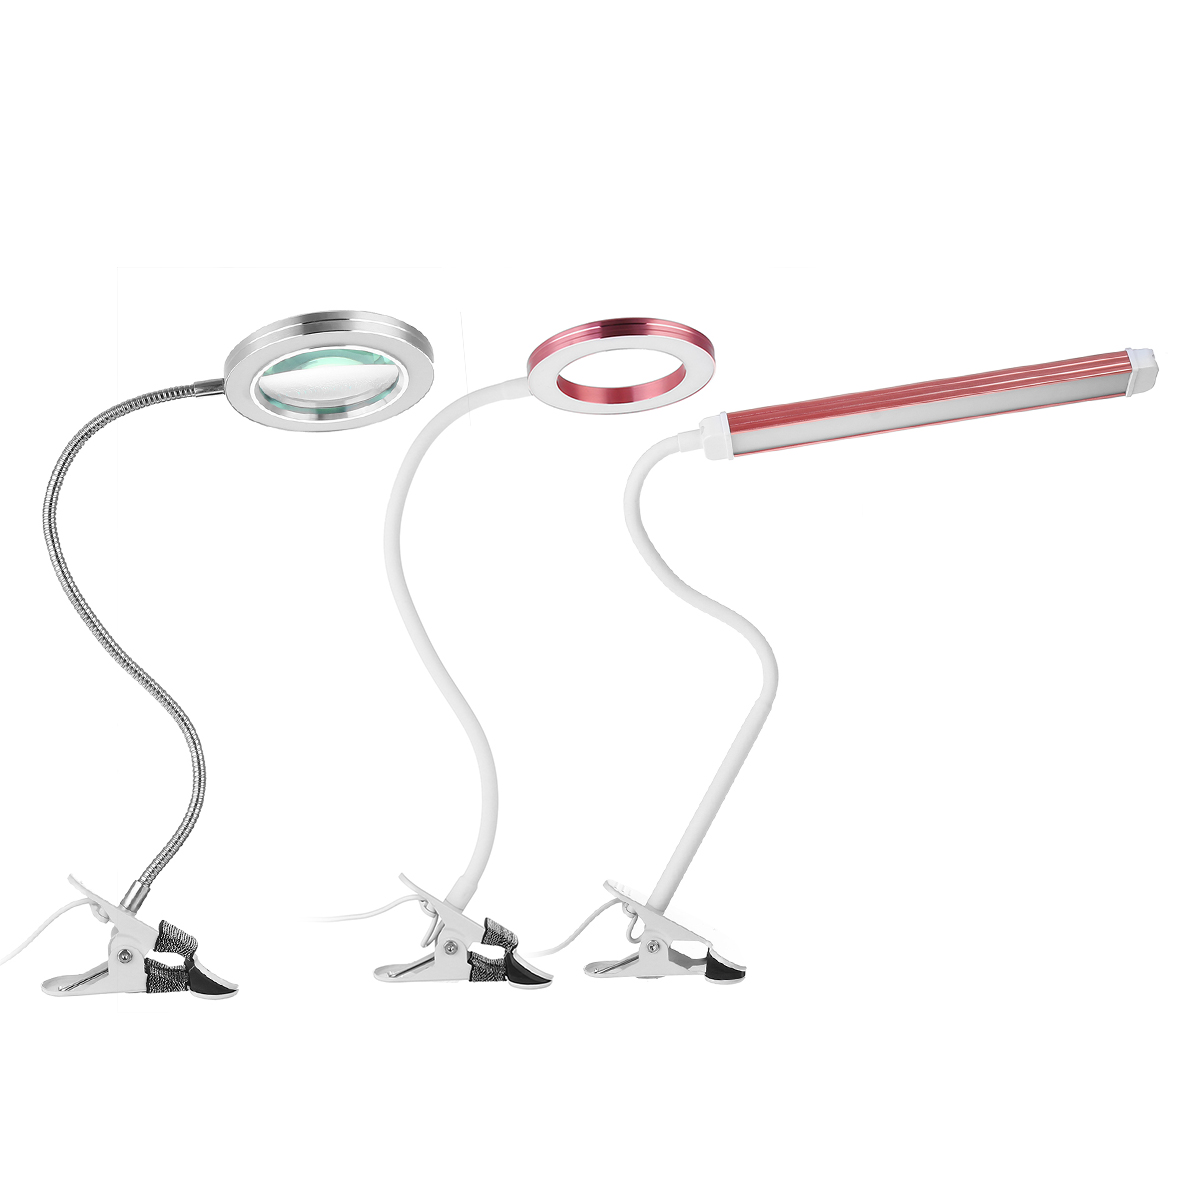 Magnifying-LED-Lamp-USB-Charging-Table-Light-Clip-on-Lamp-Beauty-Tattoo-Reading-1751255-7